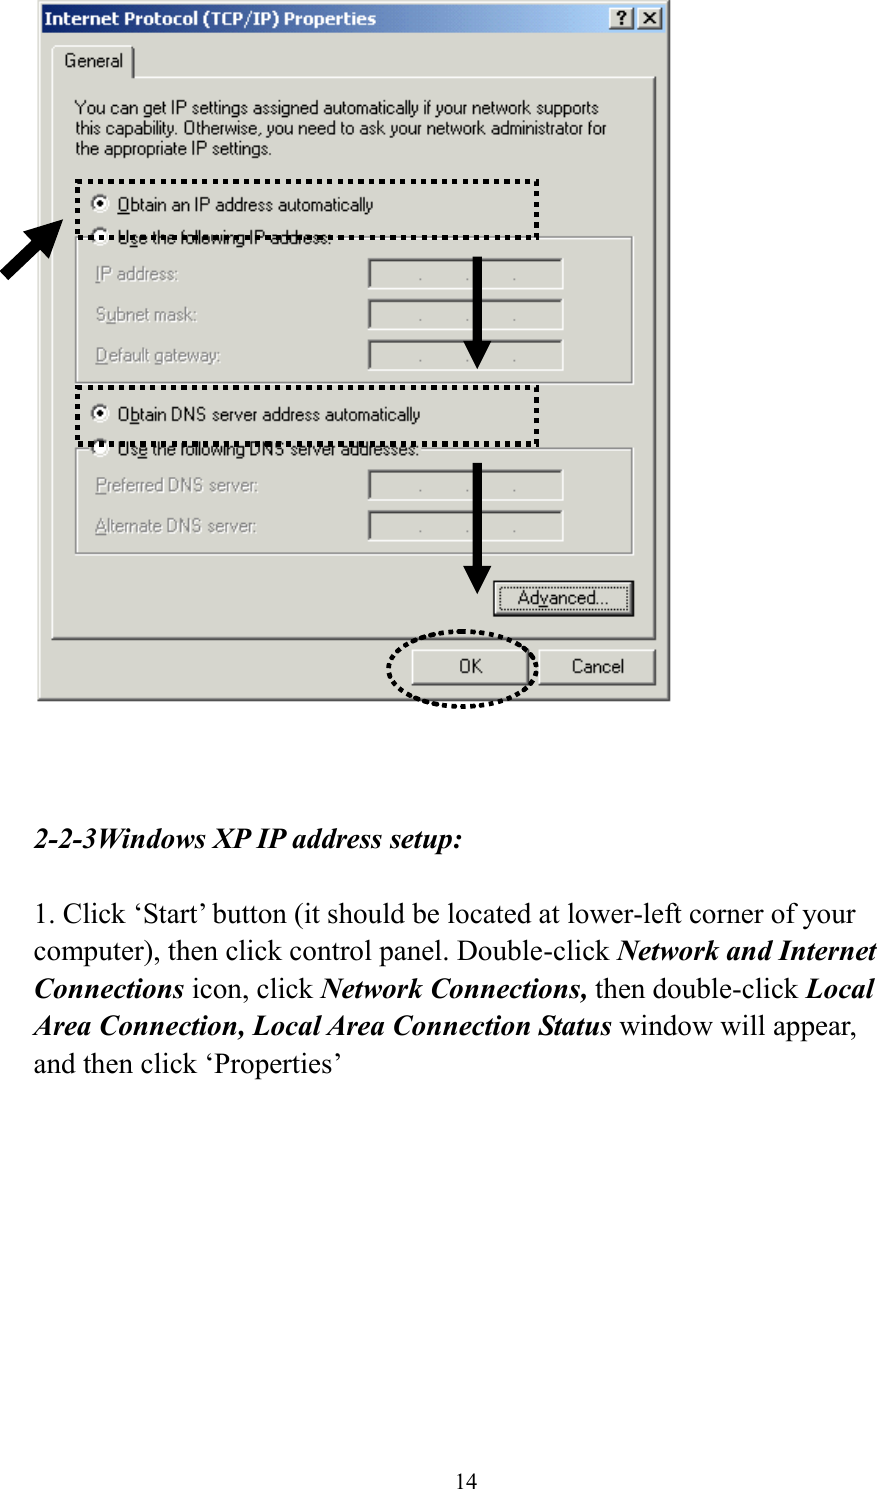 14     2-2-3Windows XP IP address setup:  1. Click ‘Start’ button (it should be located at lower-left corner of your computer), then click control panel. Double-click Network and Internet Connections icon, click Network Connections, then double-click Local Area Connection, Local Area Connection Status window will appear, and then click ‘Properties’  